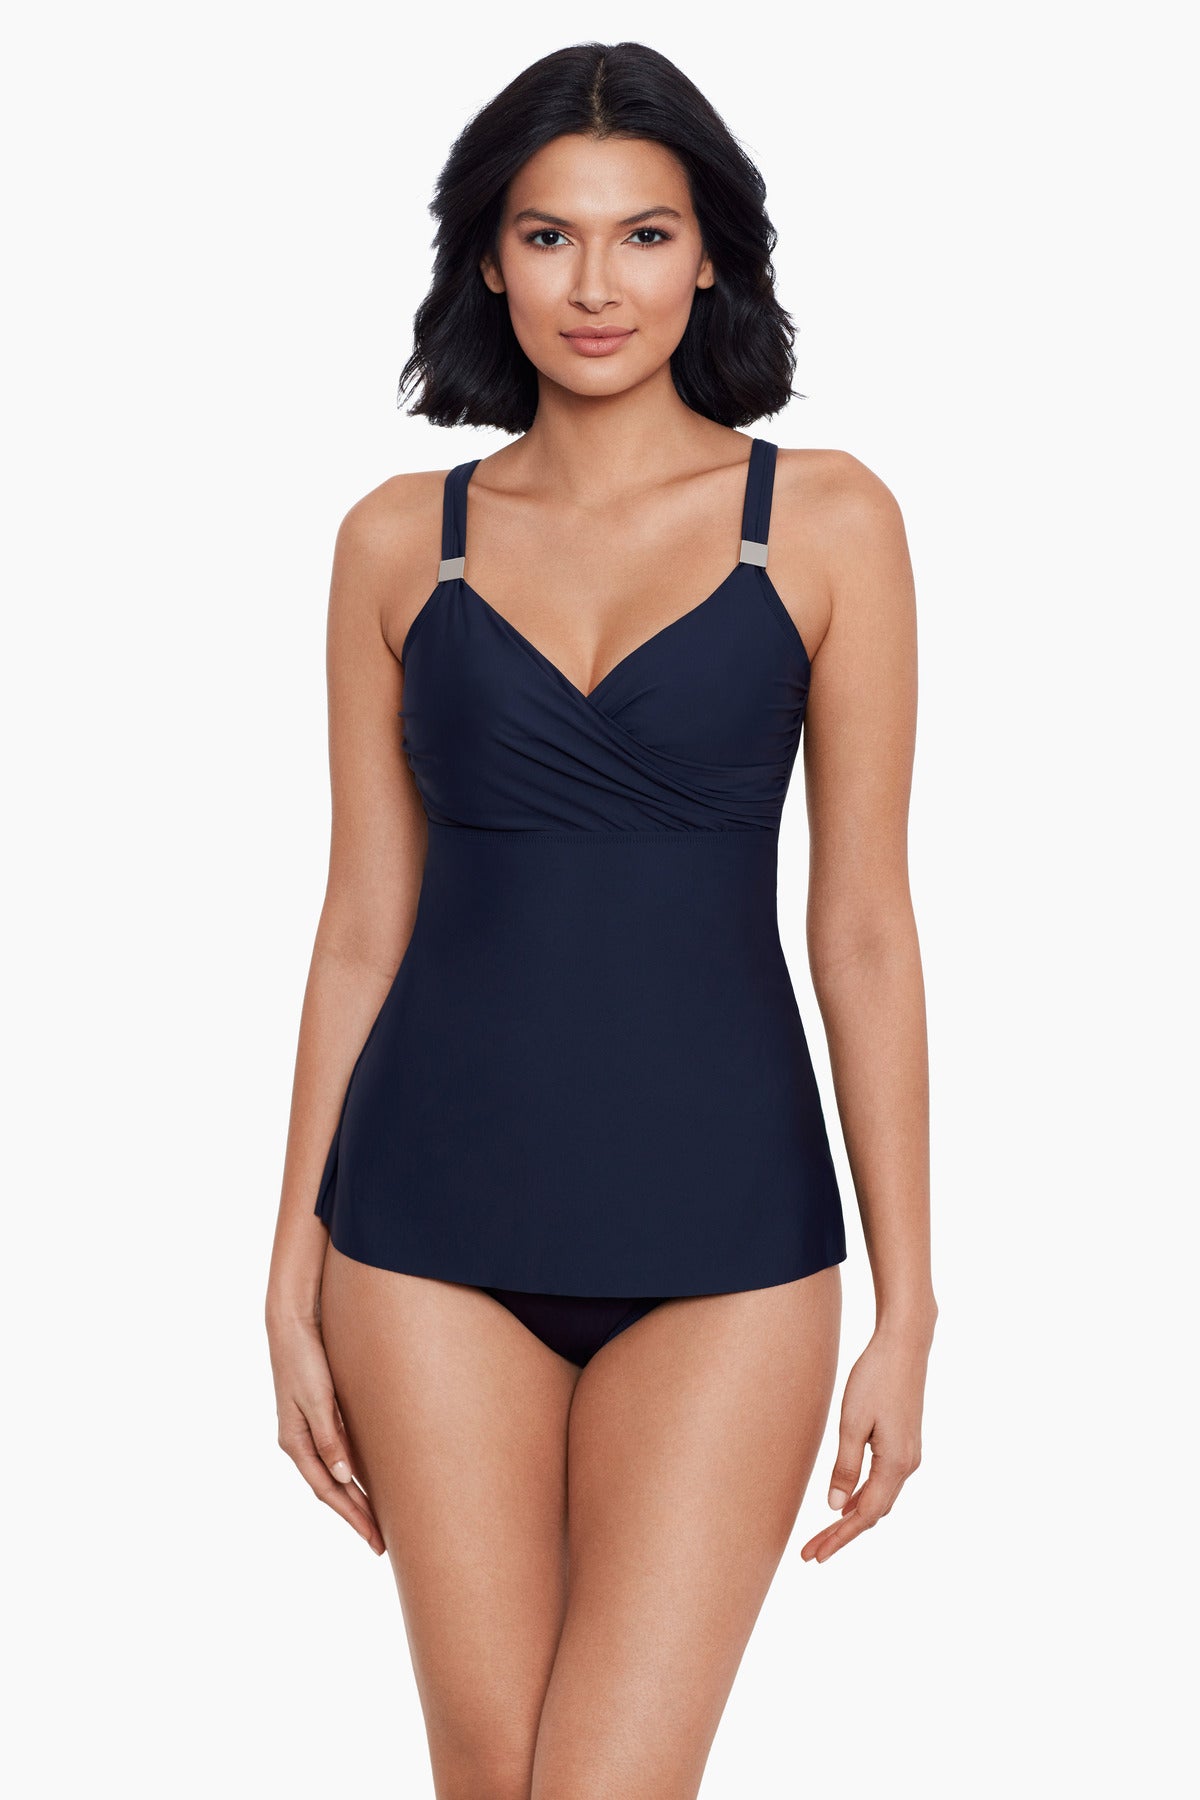 Miraclesuit Solid Underwire Plunge Tankini Top D-DDD Cups